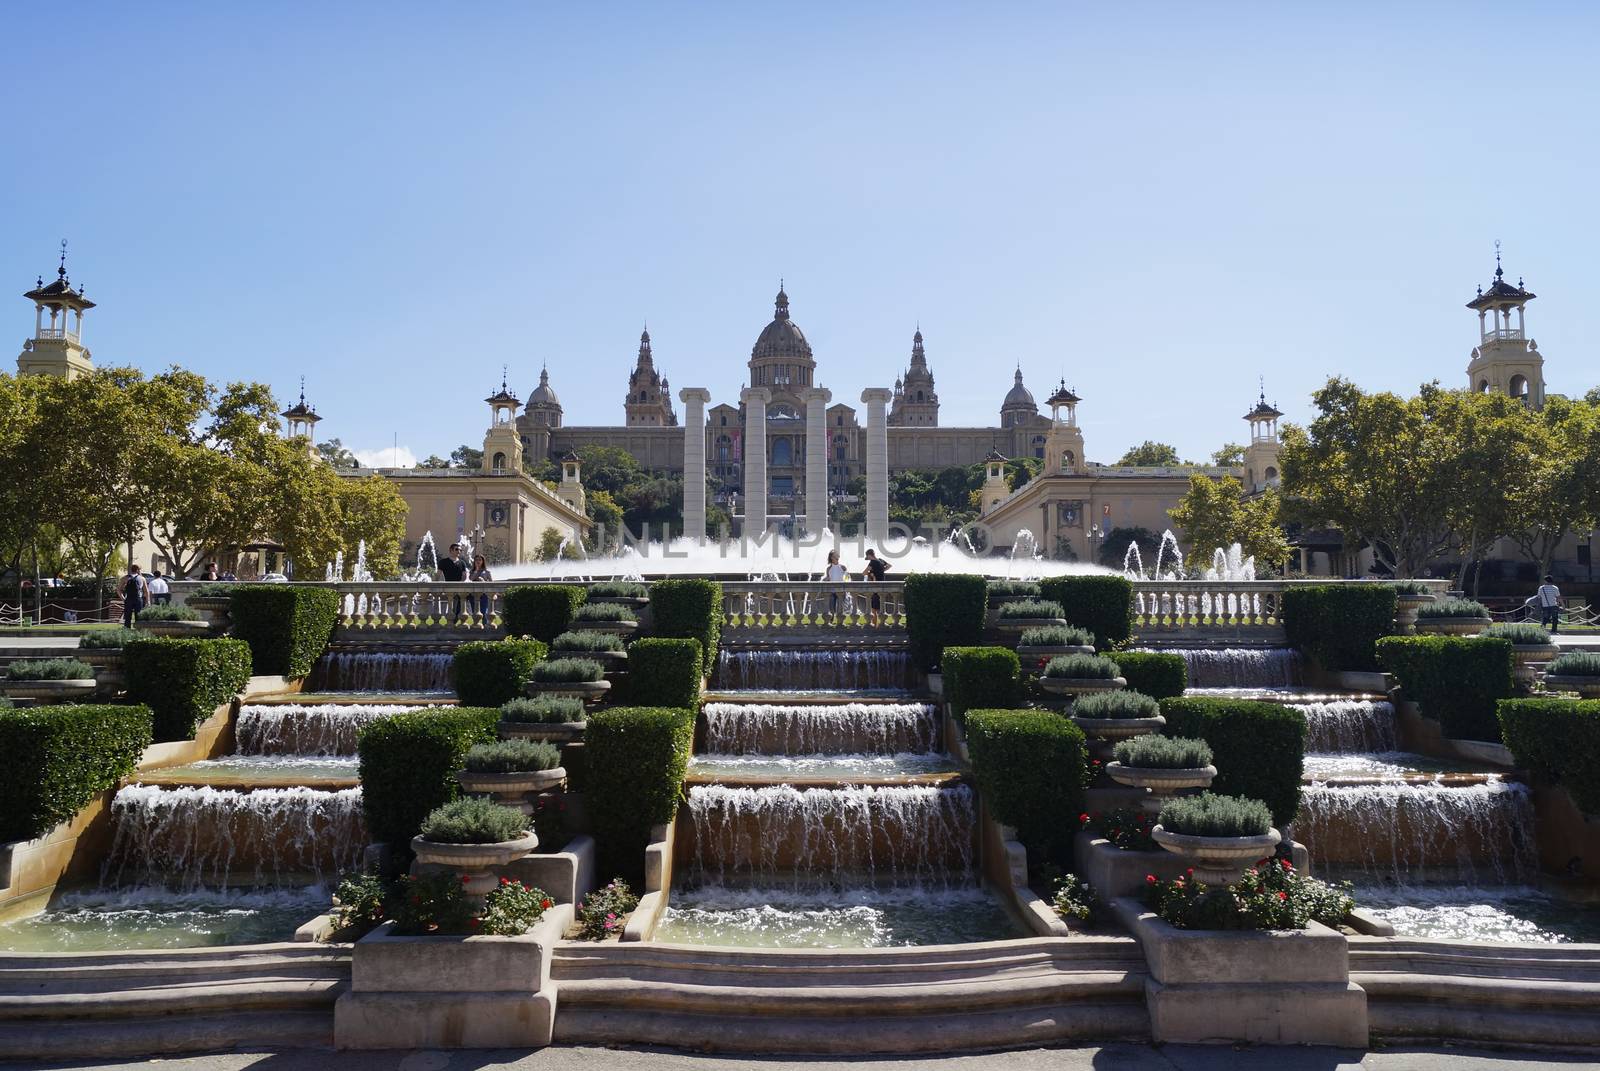 BARCELONA, SPAIN - OCTOBER 07, 2015: National Art Museum of Catalonia, situated on Montjuic hill in Barcelona, Spain 